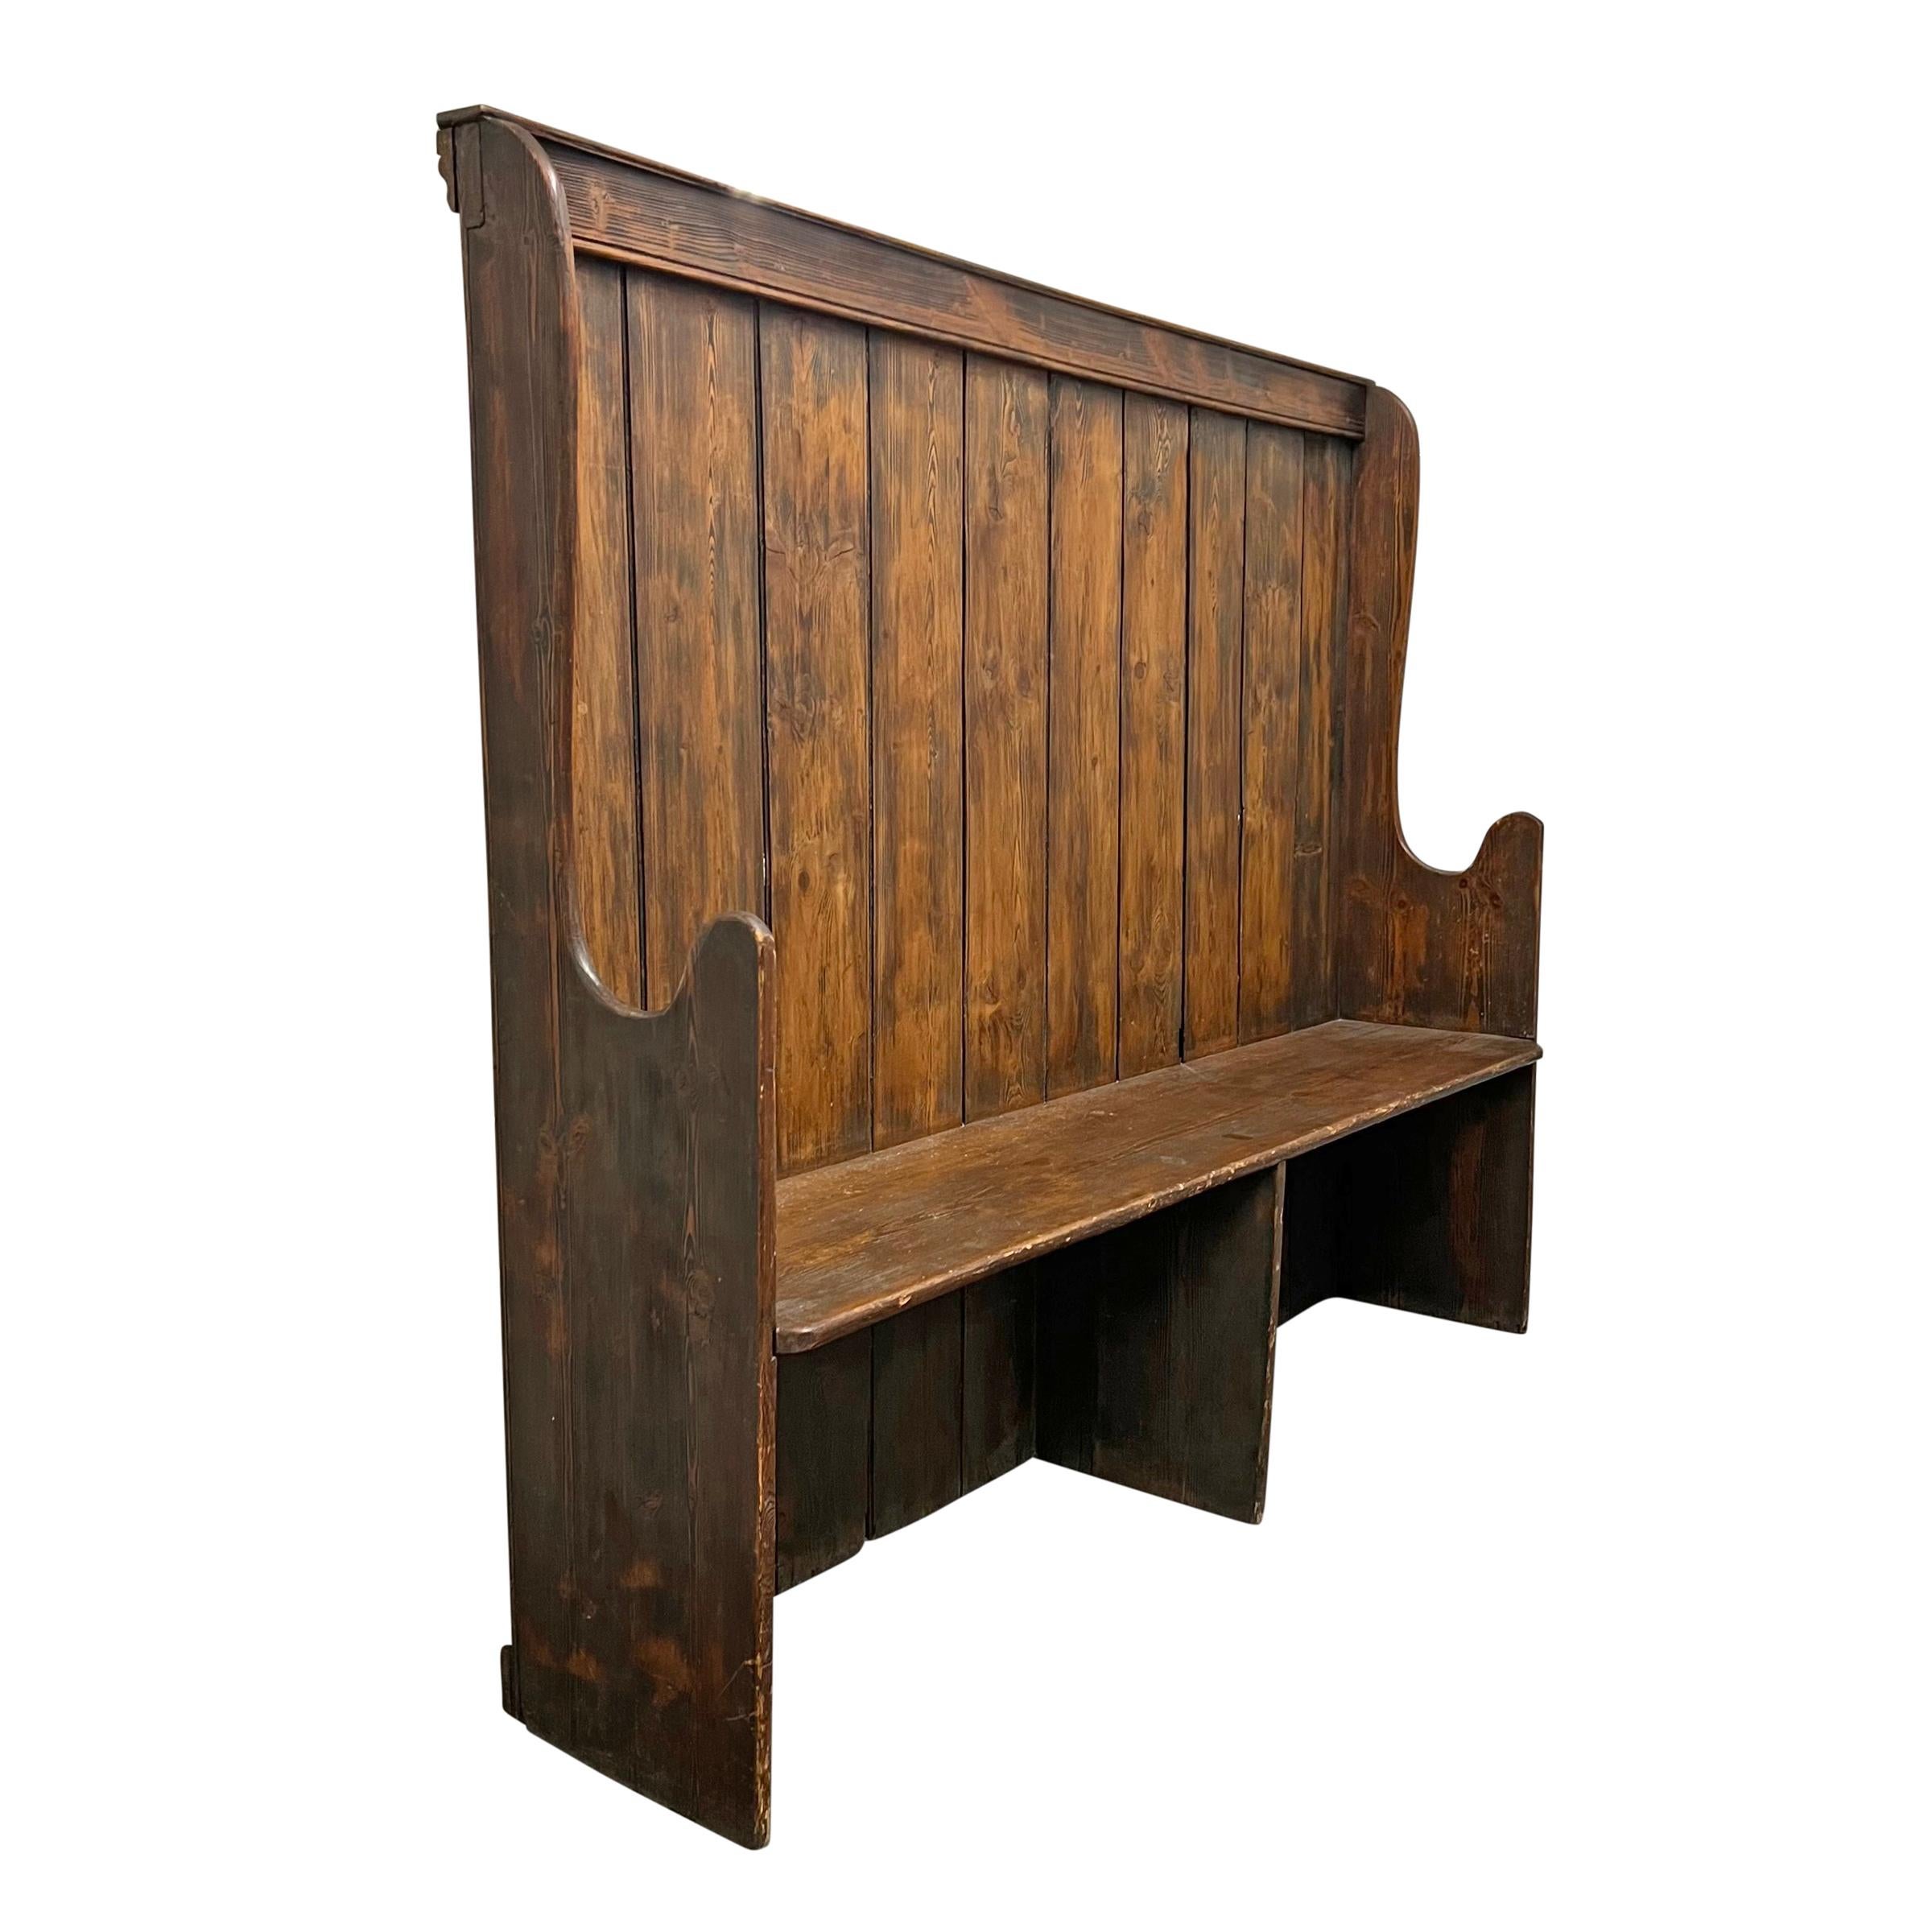 Hand-Crafted 19th Century English Pine Settle